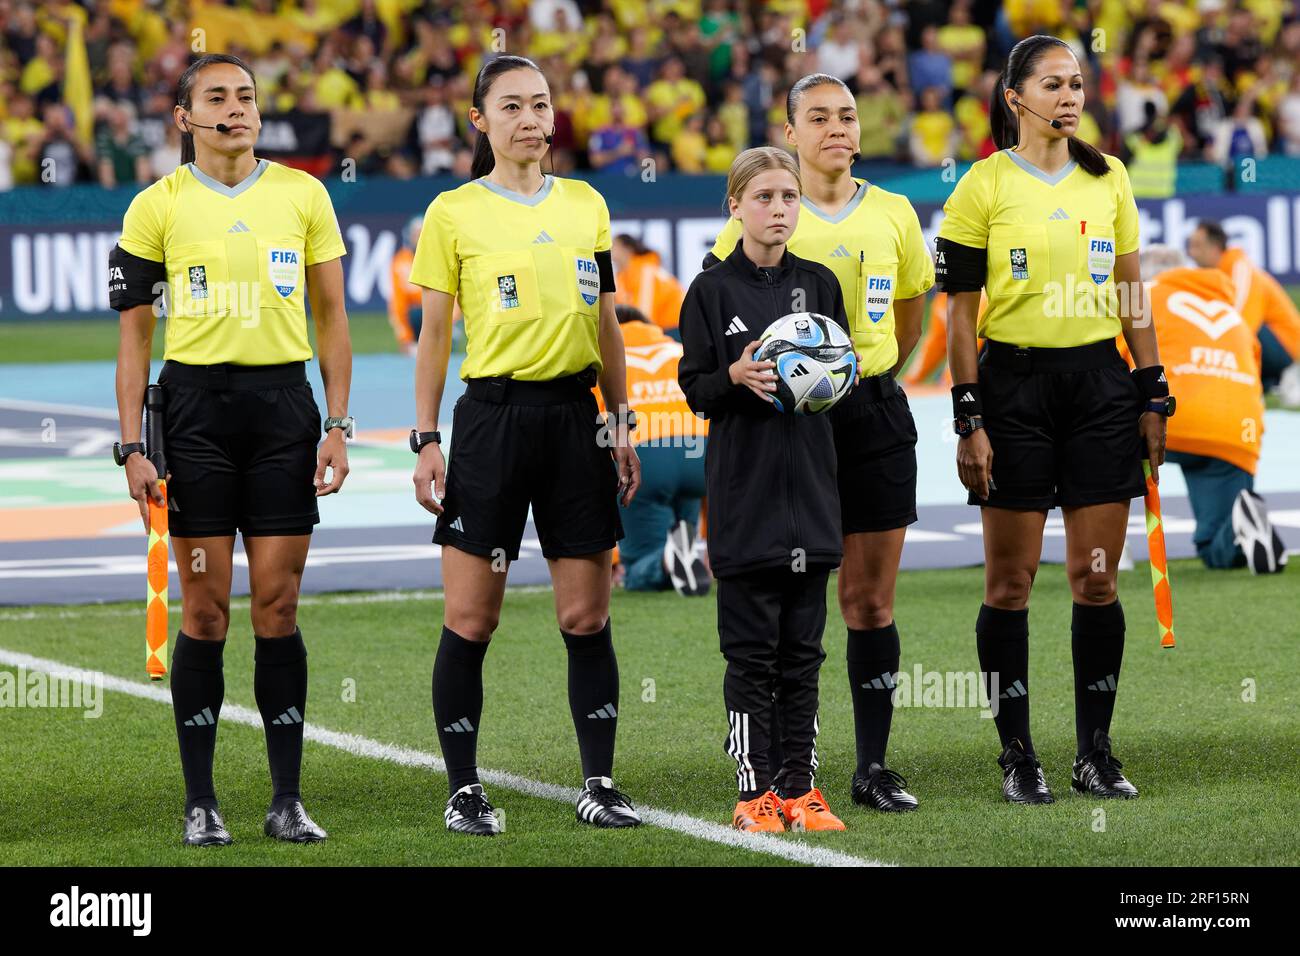 Sydney, Australia. 30th July, 2023. Match Referees line up for the National Anthem before the FIFA Women's World Cup 2023 Group H match between Germany and Colombia at Sydney Football Stadium on July 30, 2023 in Sydney, Australia Credit: IOIO IMAGES/Alamy Live News Stock Photo